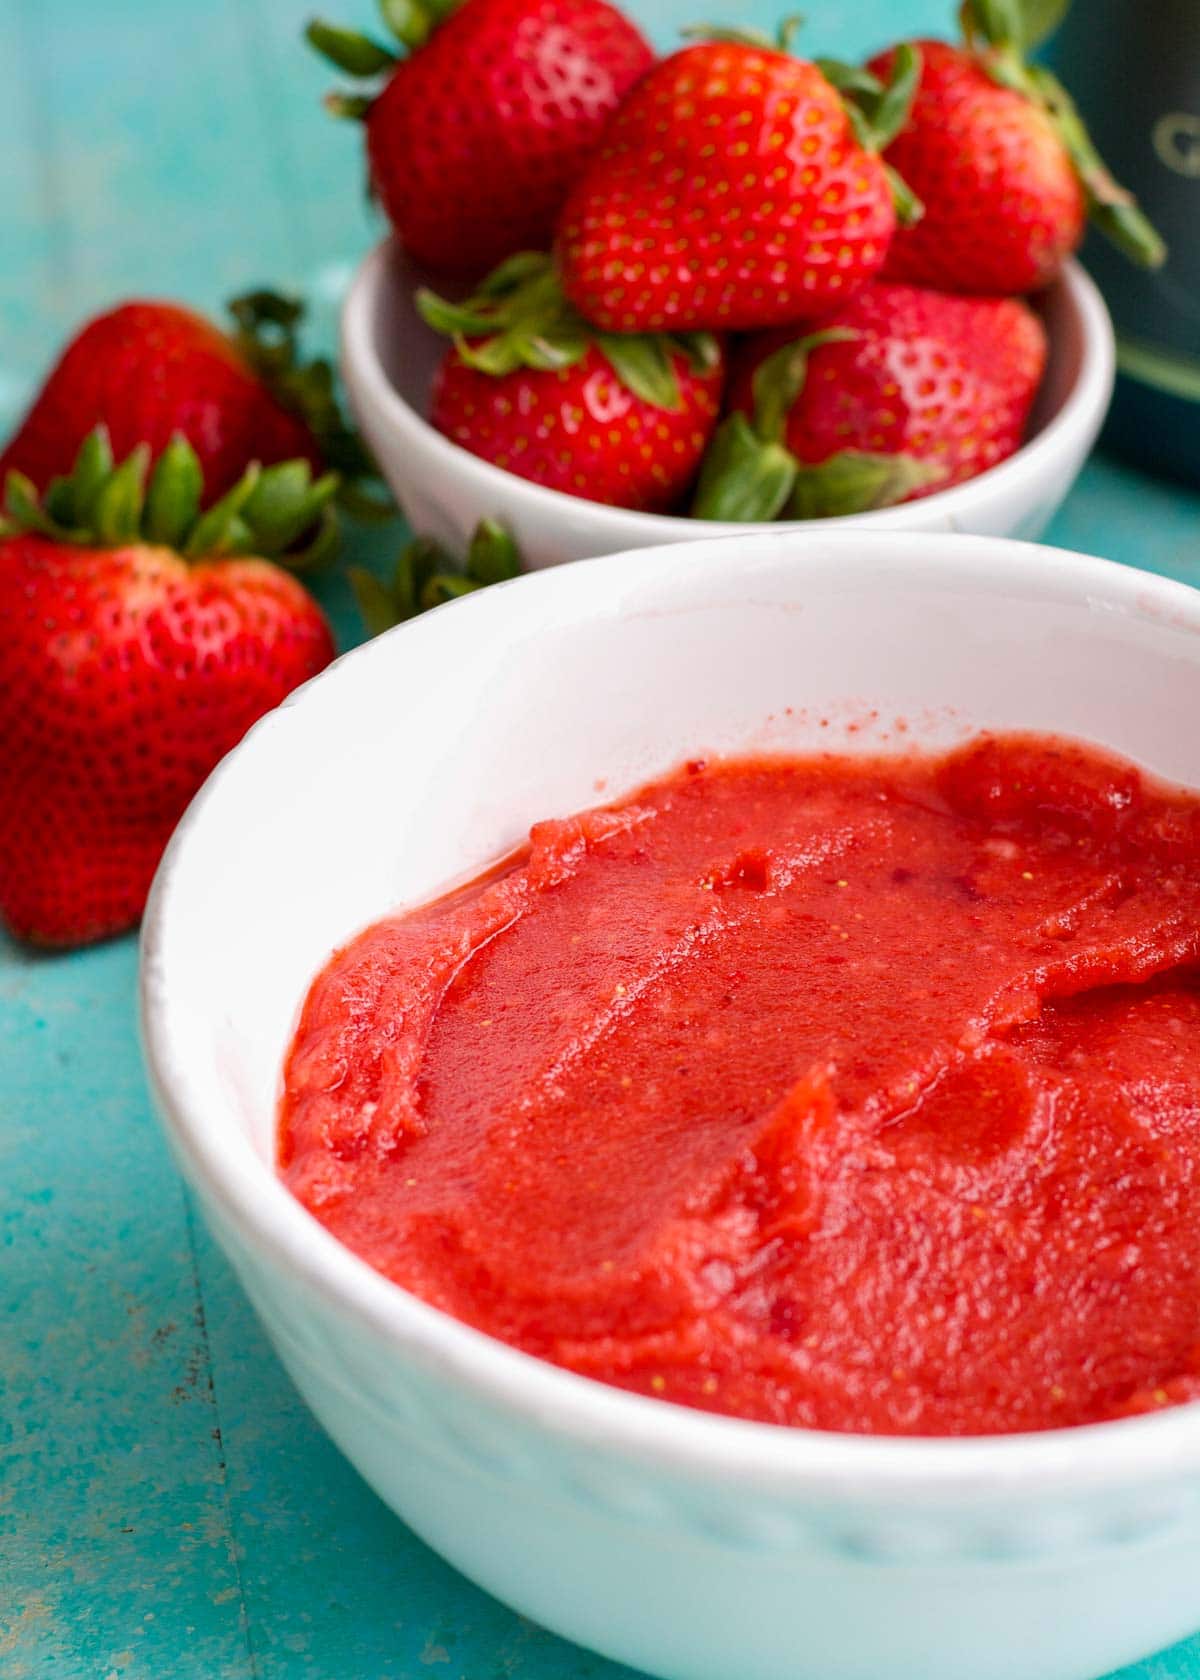 Skip the ice cream maker and freeze the sorbet in a bowl in the freezer